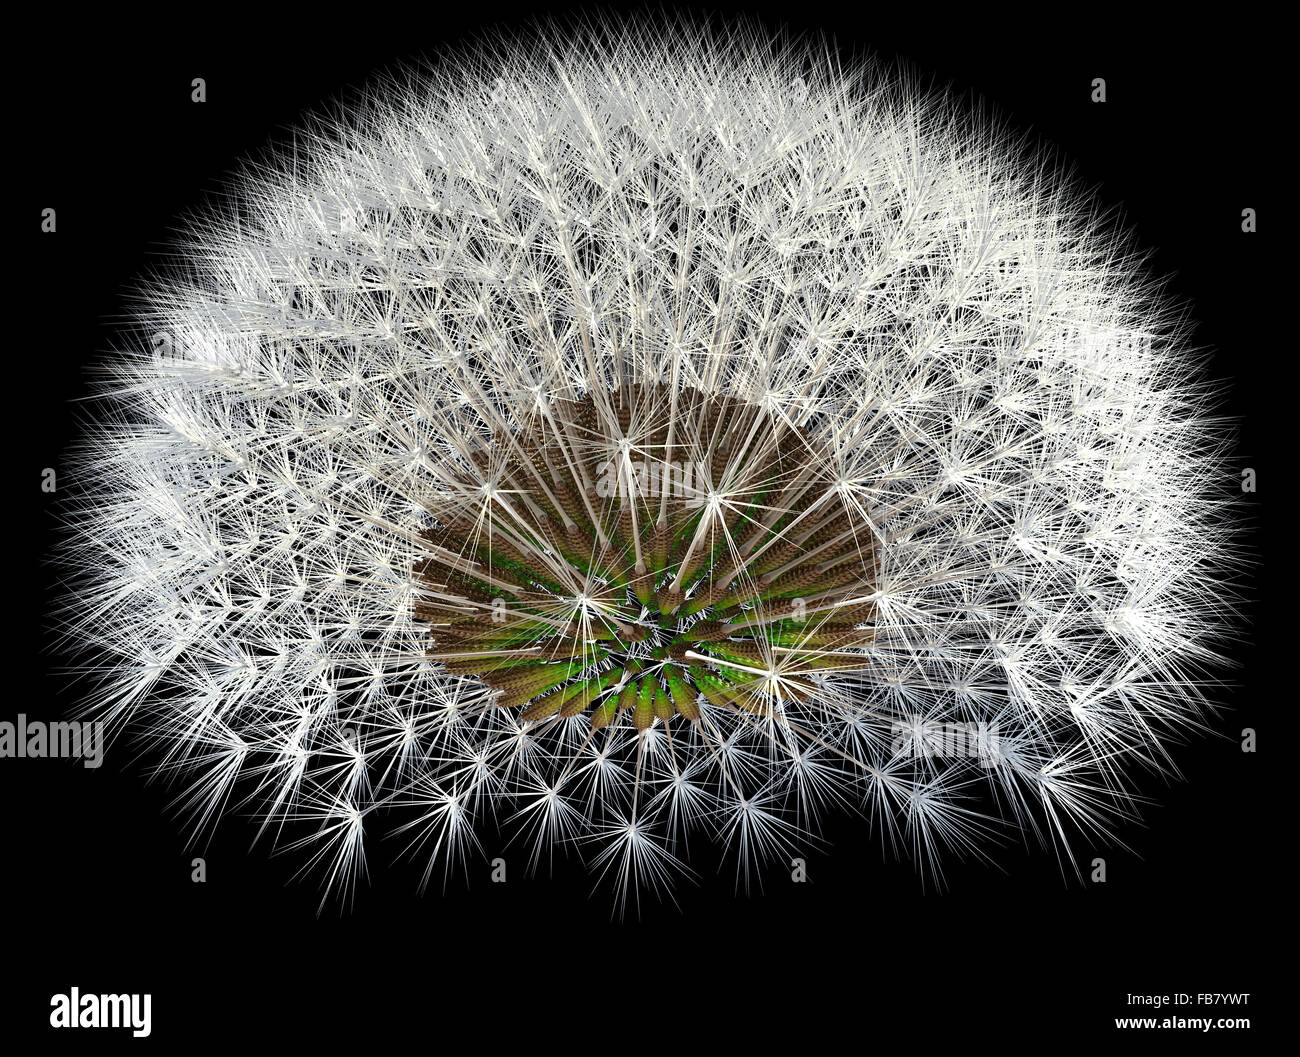 Dandelion seeds, 3d generated, black background. Fibonacci sequence and golden ratio experiments. Stock Photo